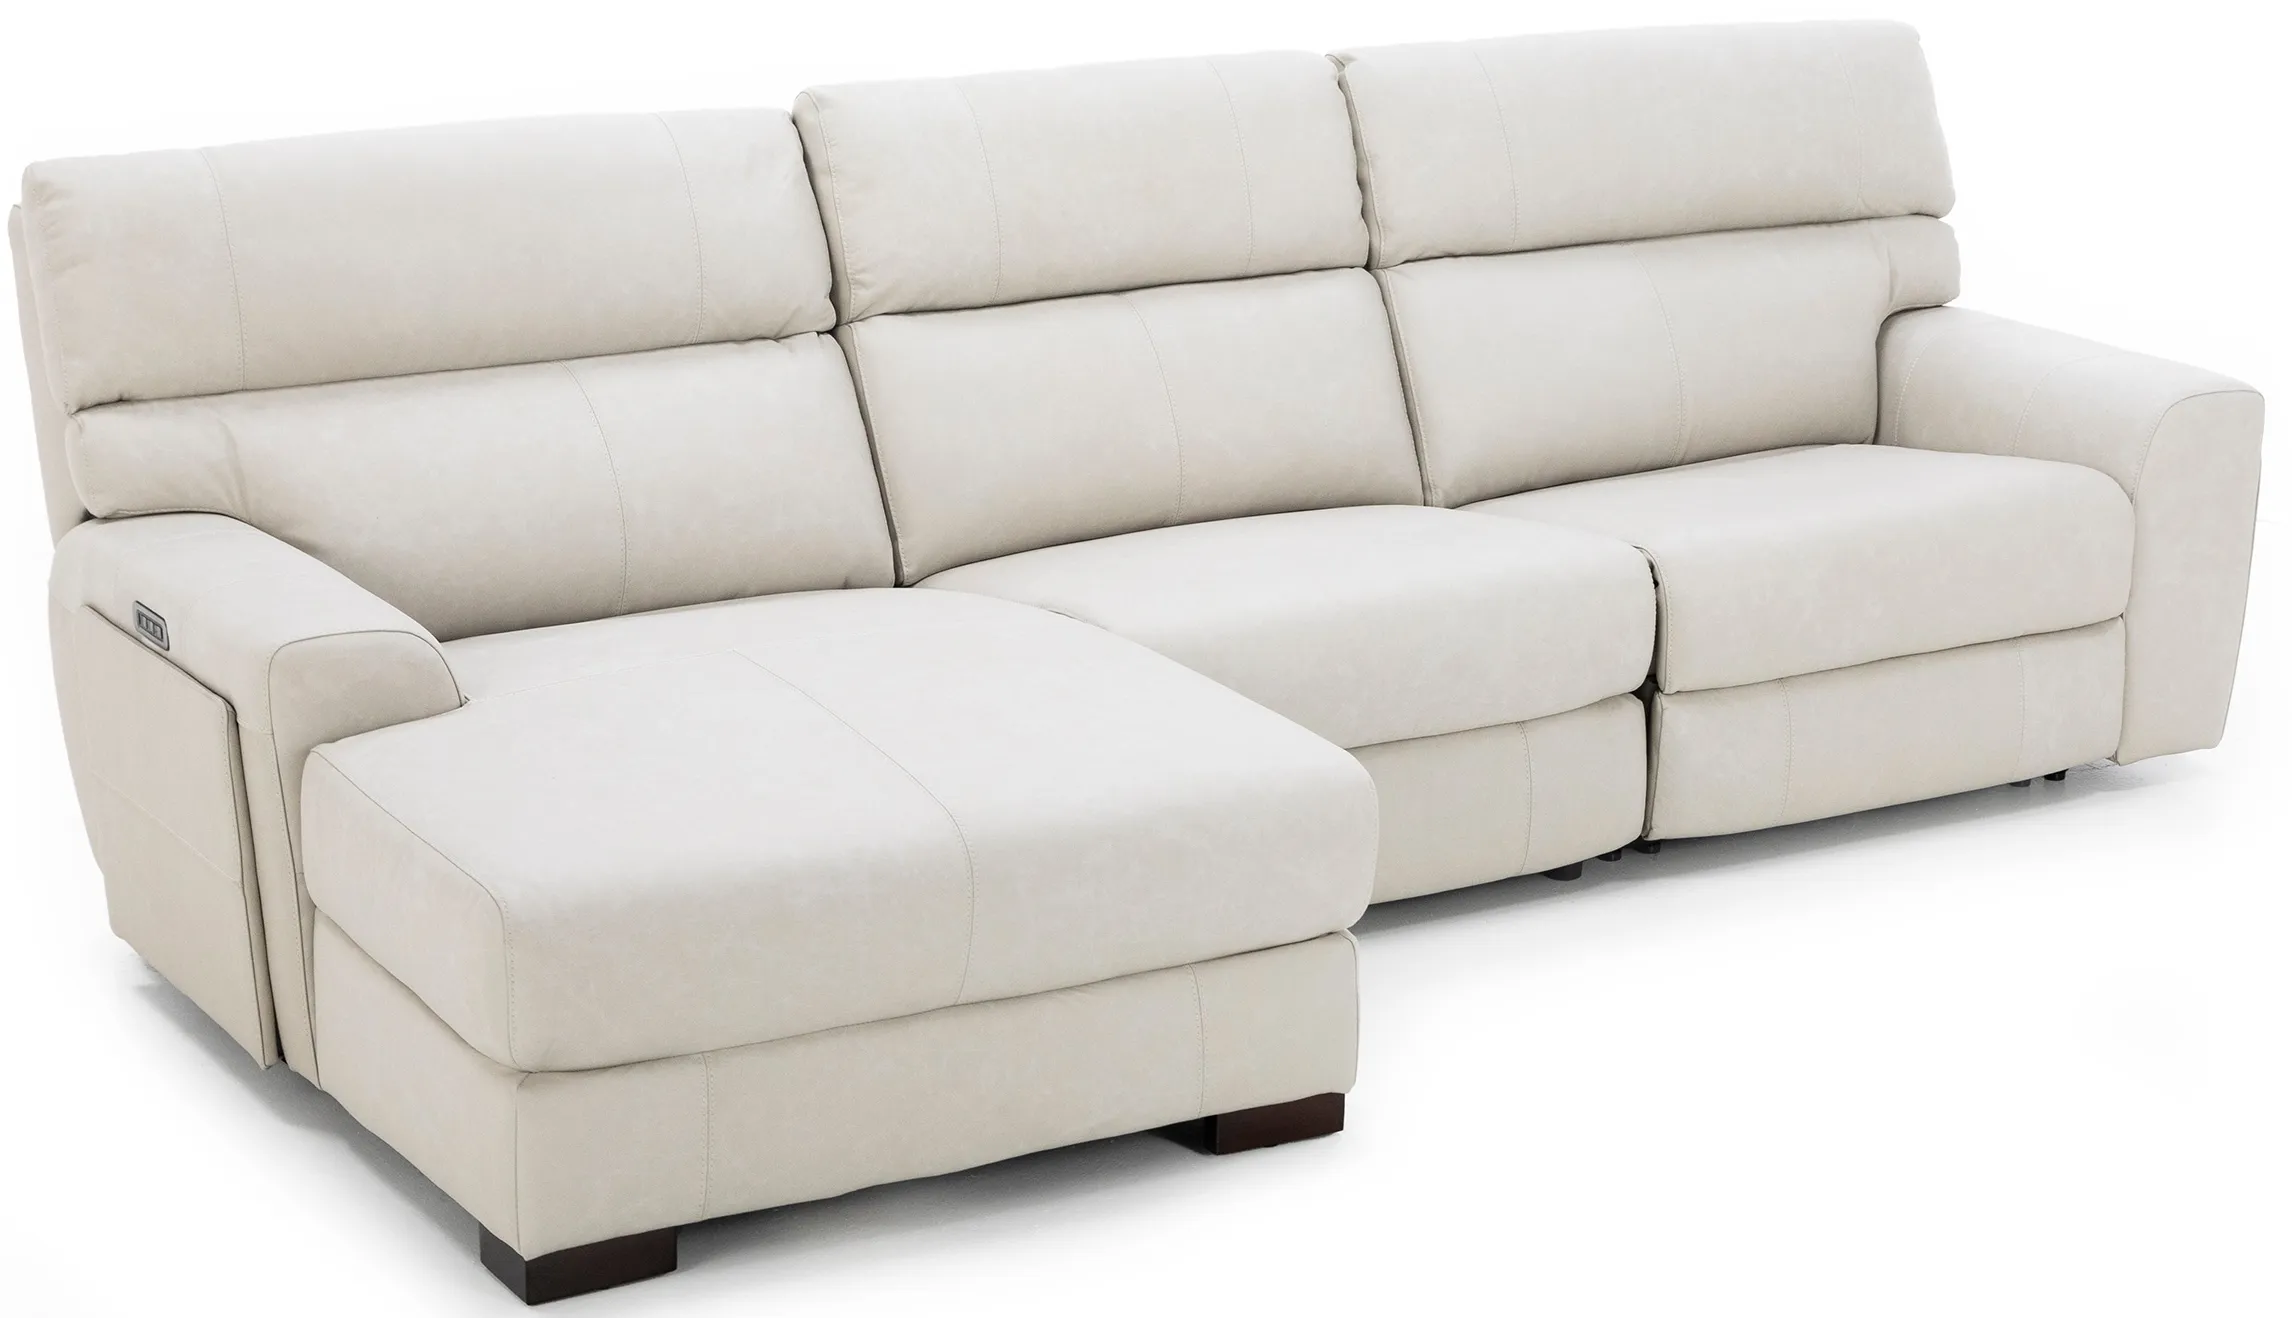 Teller 3-Pc. Leather Fully Loaded Zero Gravity Reclining Chaise Sofa